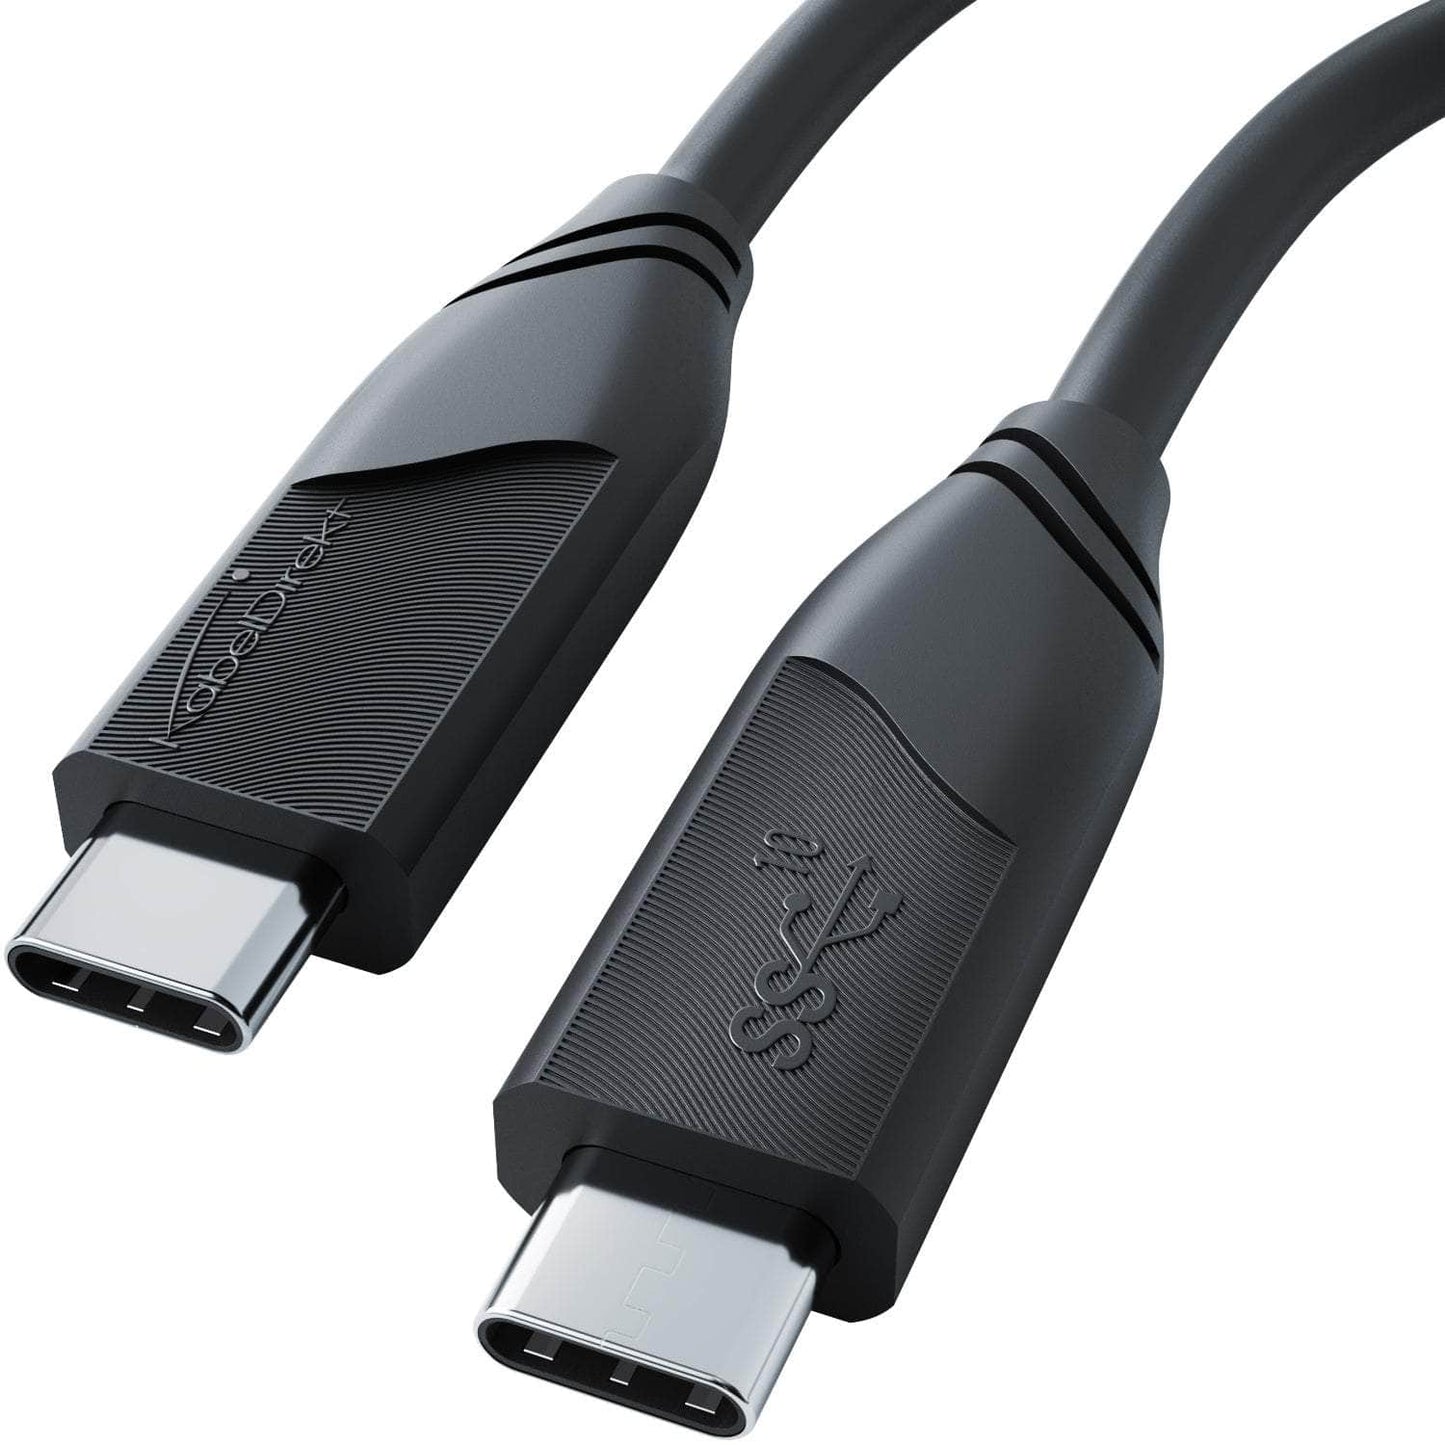 USB C Cable - USB 3.2, Power Delivery 3, black